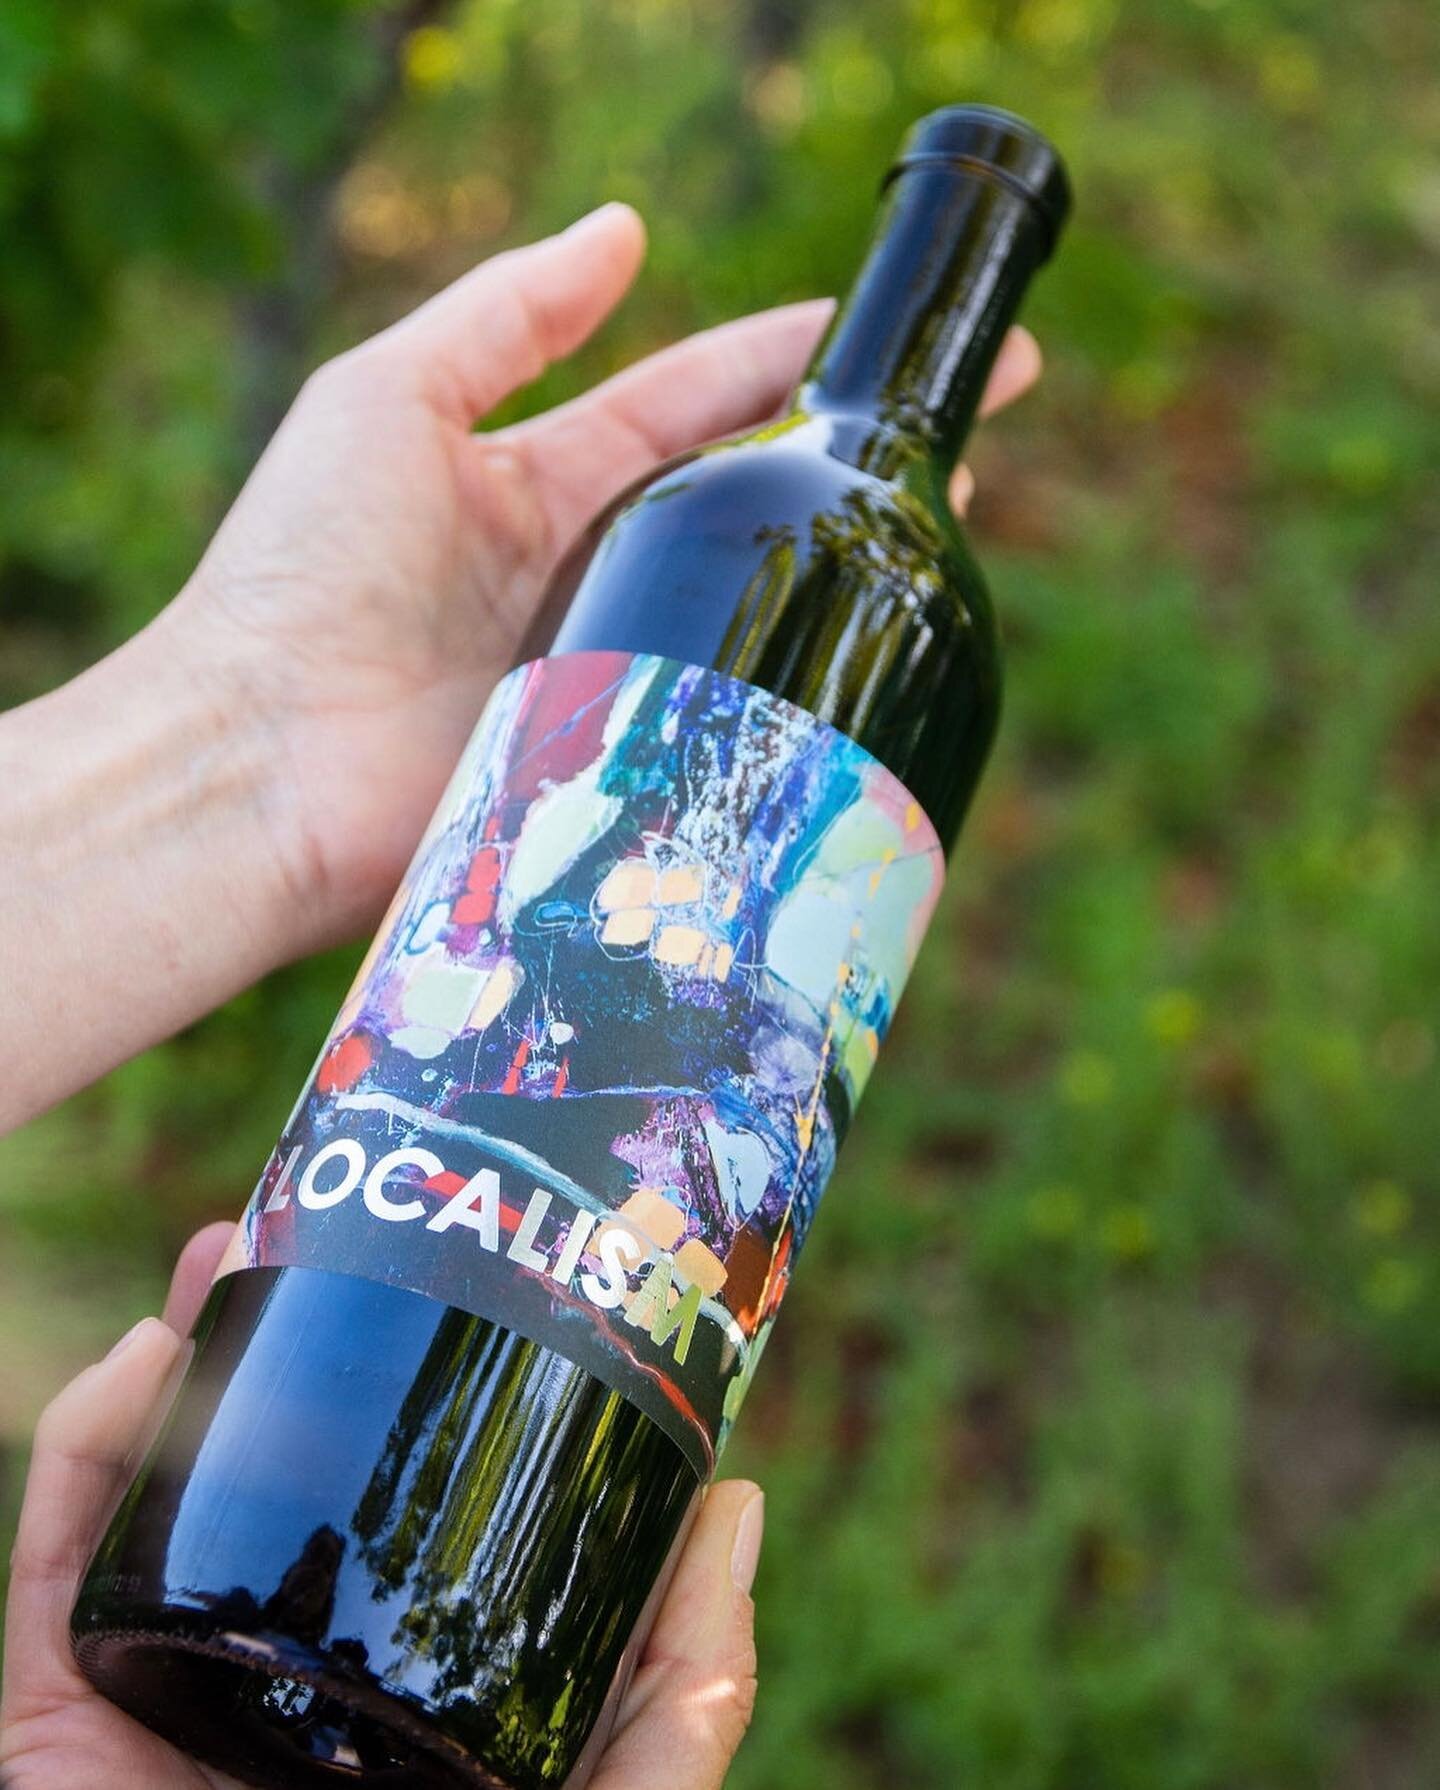 We are so fortunate to release our 2020 Cabernet Sauvignon! This wine is a beautiful interpretation of our Coombsville Vineyard and a truly unforgettable vintage.

For more details or to purchase, please visit the link in our bio.

📸: @mecreativenap